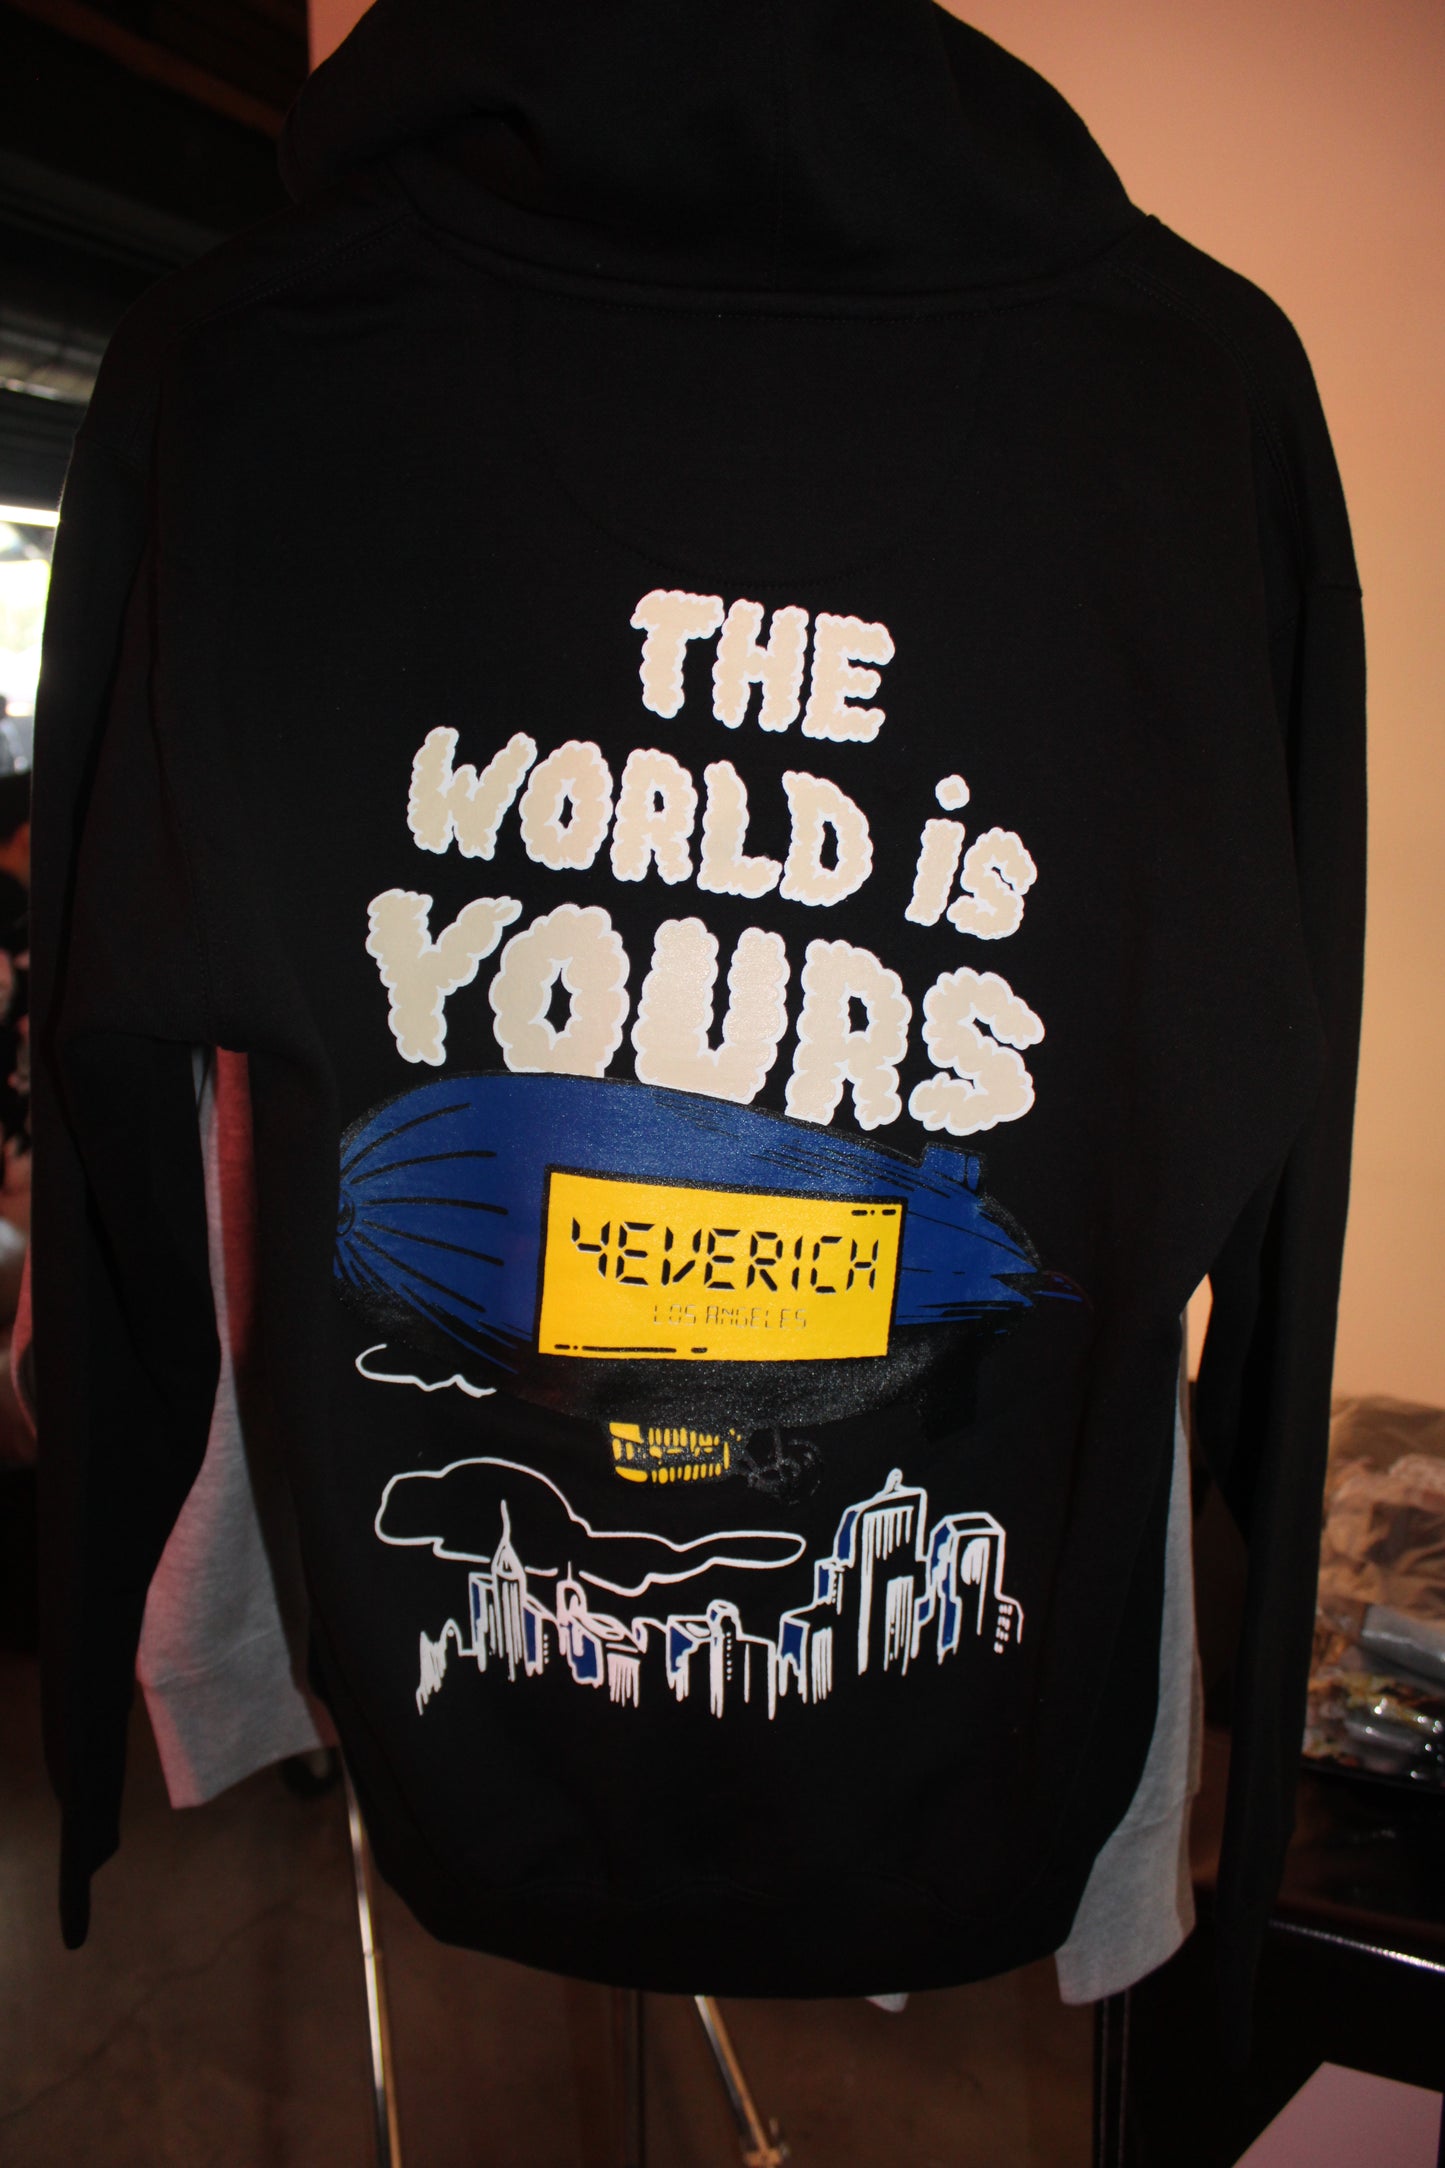 4EVERICH World Is Yours Hoodie BLK